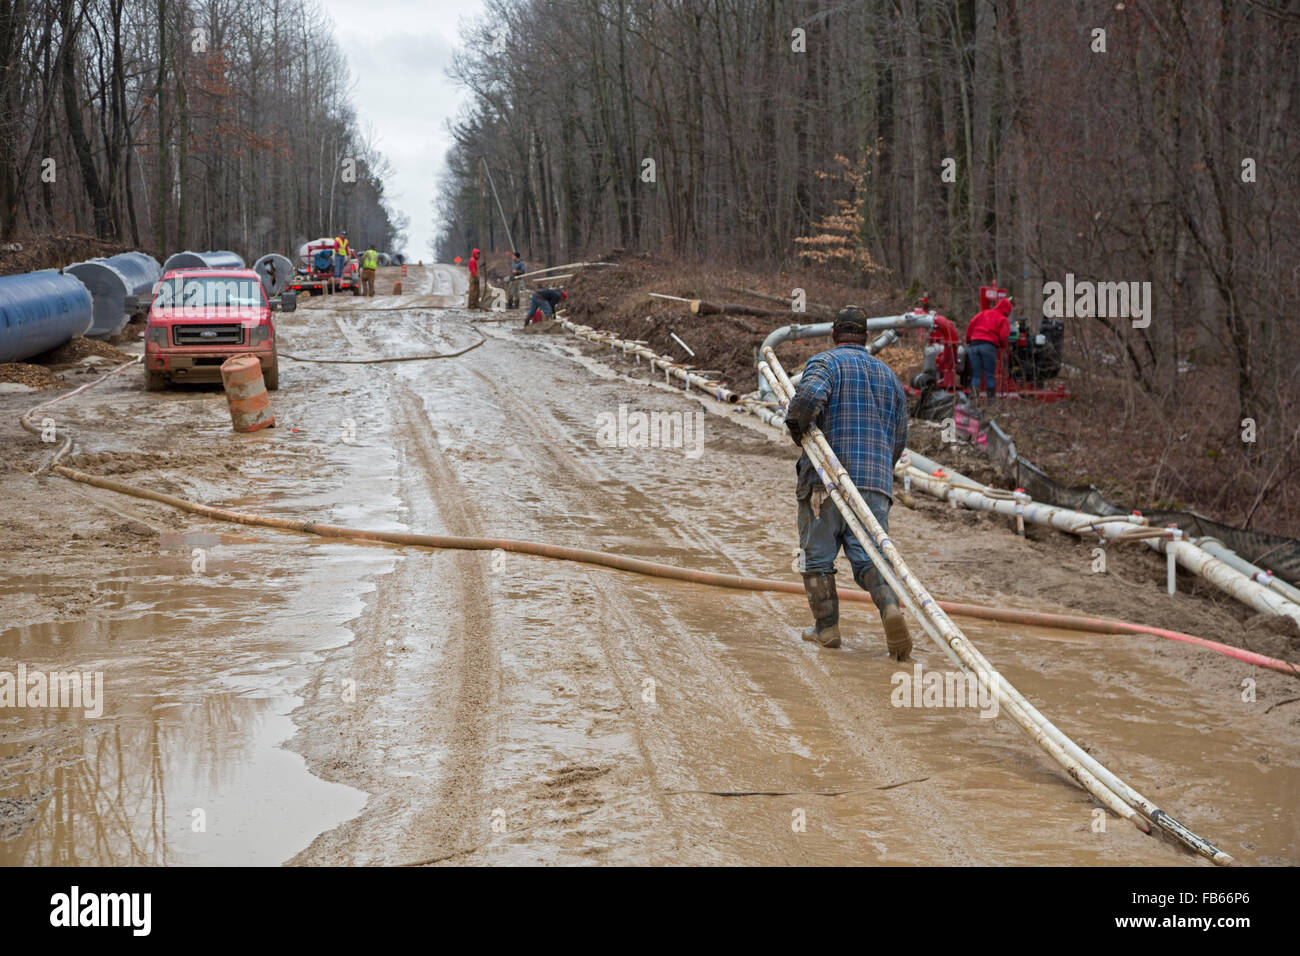 Columbiaville, Michigan - Construction of a water pipeline for Flint, Michigan and surrounding areas. Stock Photo